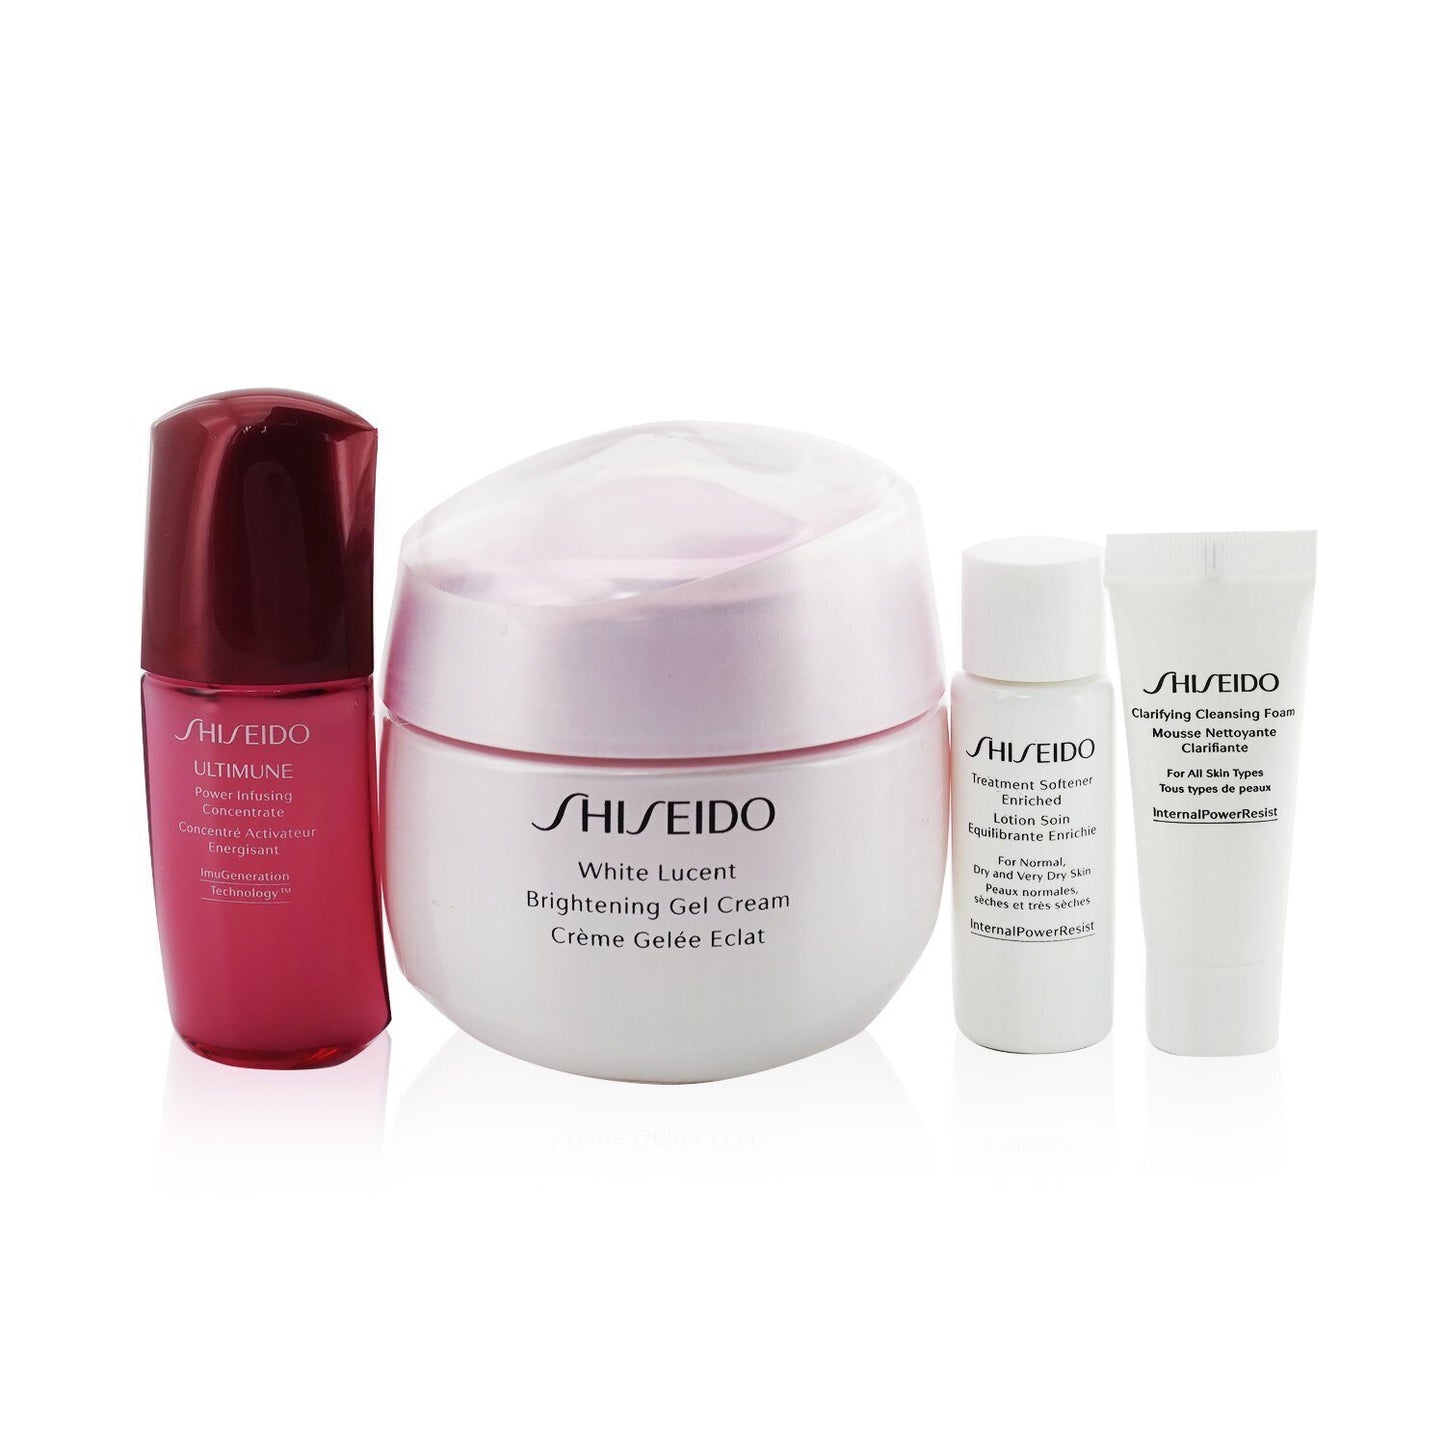 SHISEIDO - White Lucent Holiday Set: Gel Cream 50ml + Cleansing Foam 5ml + Softener Enriched 7ml + Ultimune Concentrate 10ml 1955950 4pcs - lolaluxeshop